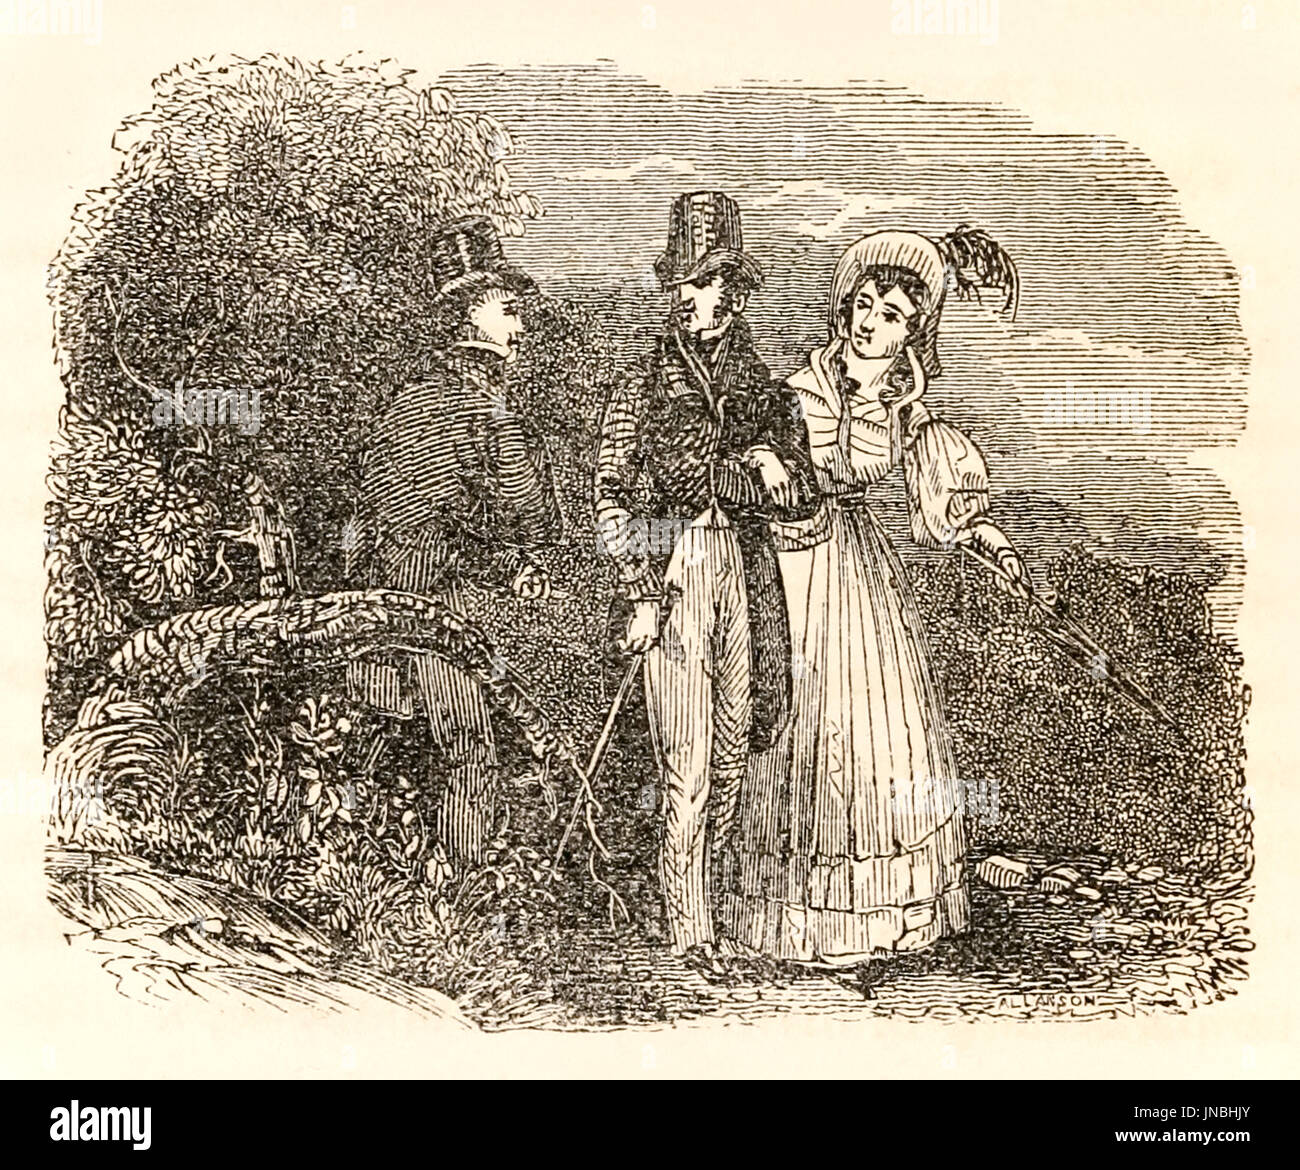 Buckingham walks with Julia, illustration from ‘Uncle Tom’s Cabin Contrasted with Buckingham Hall’ by Robert Criswell in which Julia Tennyson, an abolitionist and writer from the North who has published pamphlets against the cruelty of slavery; falls in love with Colonel Buckingham a southern plantation owner and both enter into philosophical discussions regarding American slavery. Stock Photo